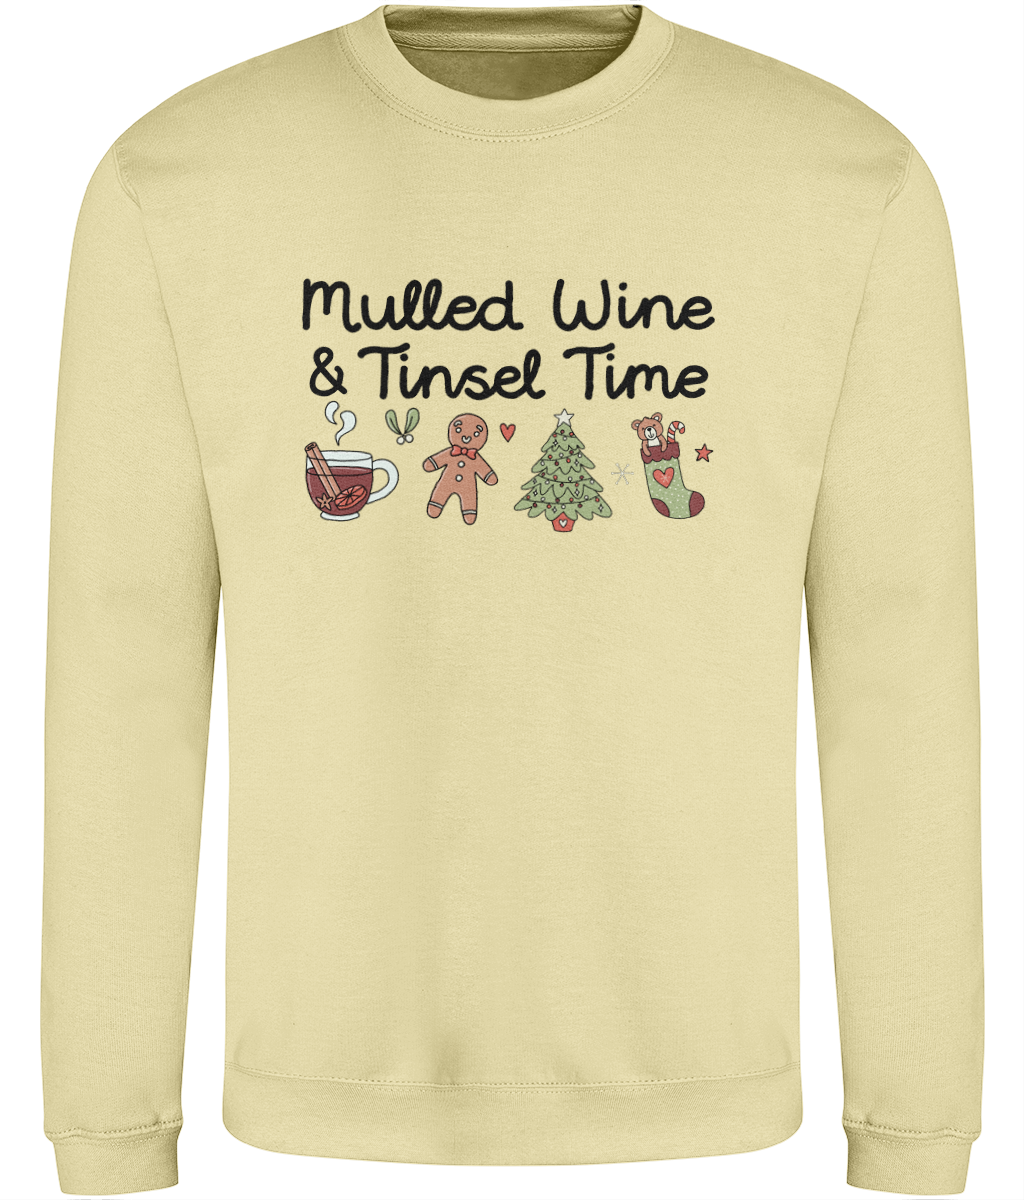 Mulled Wine & Tinsel Time - Adult Sweatshirt - Multi Colour Available